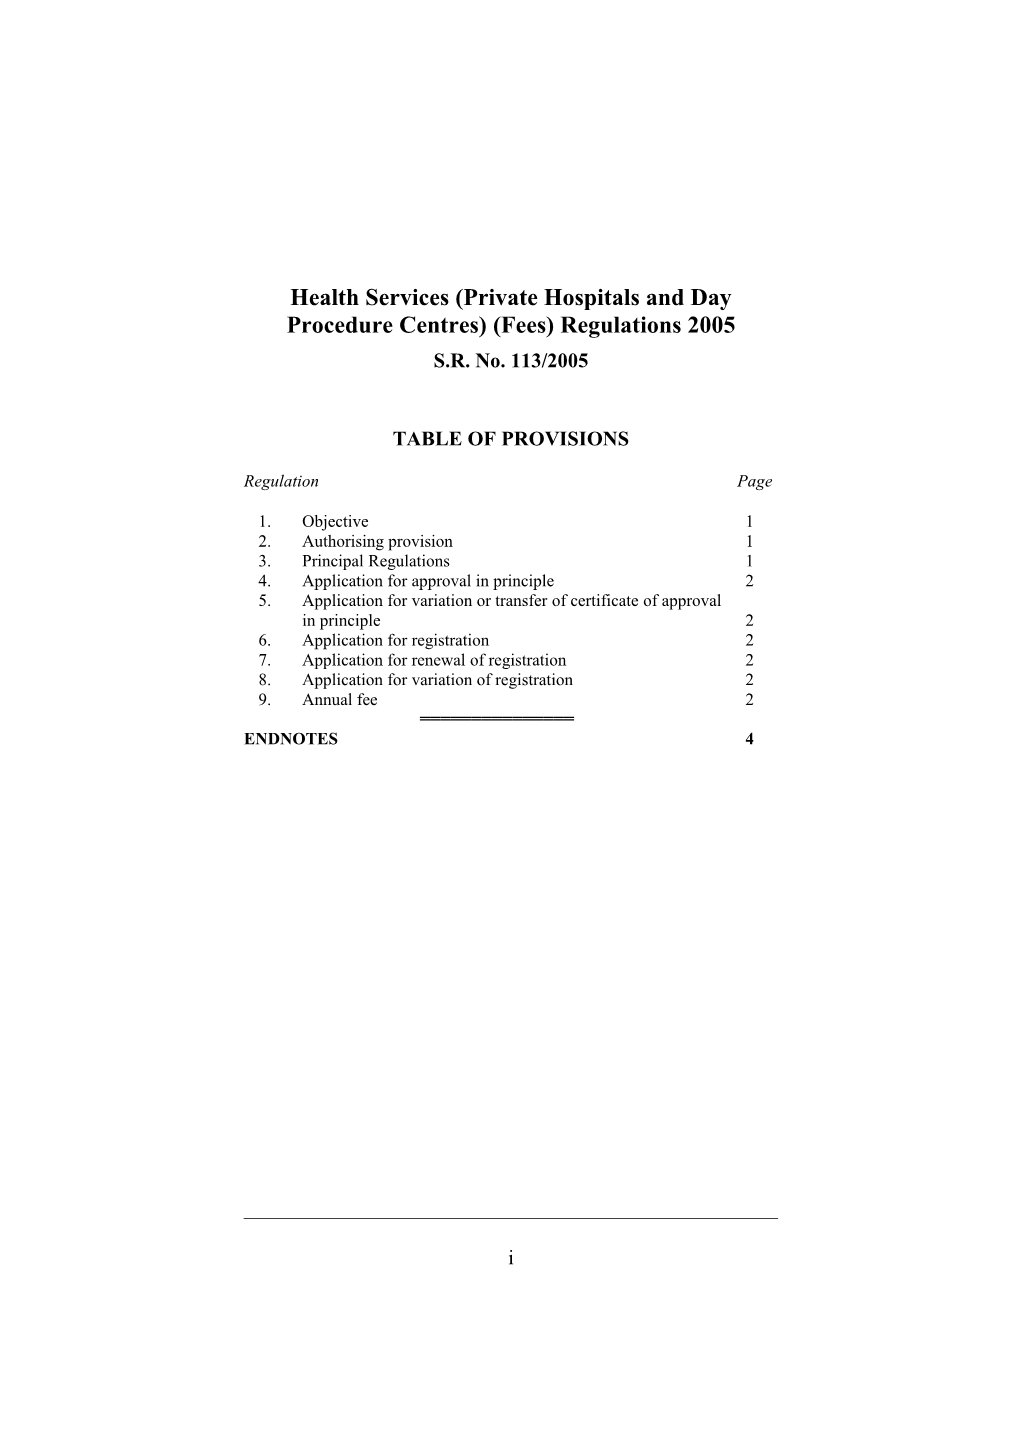 Health Services (Private Hospitals and Day Procedure Centres) (Fees) Regulations 2005